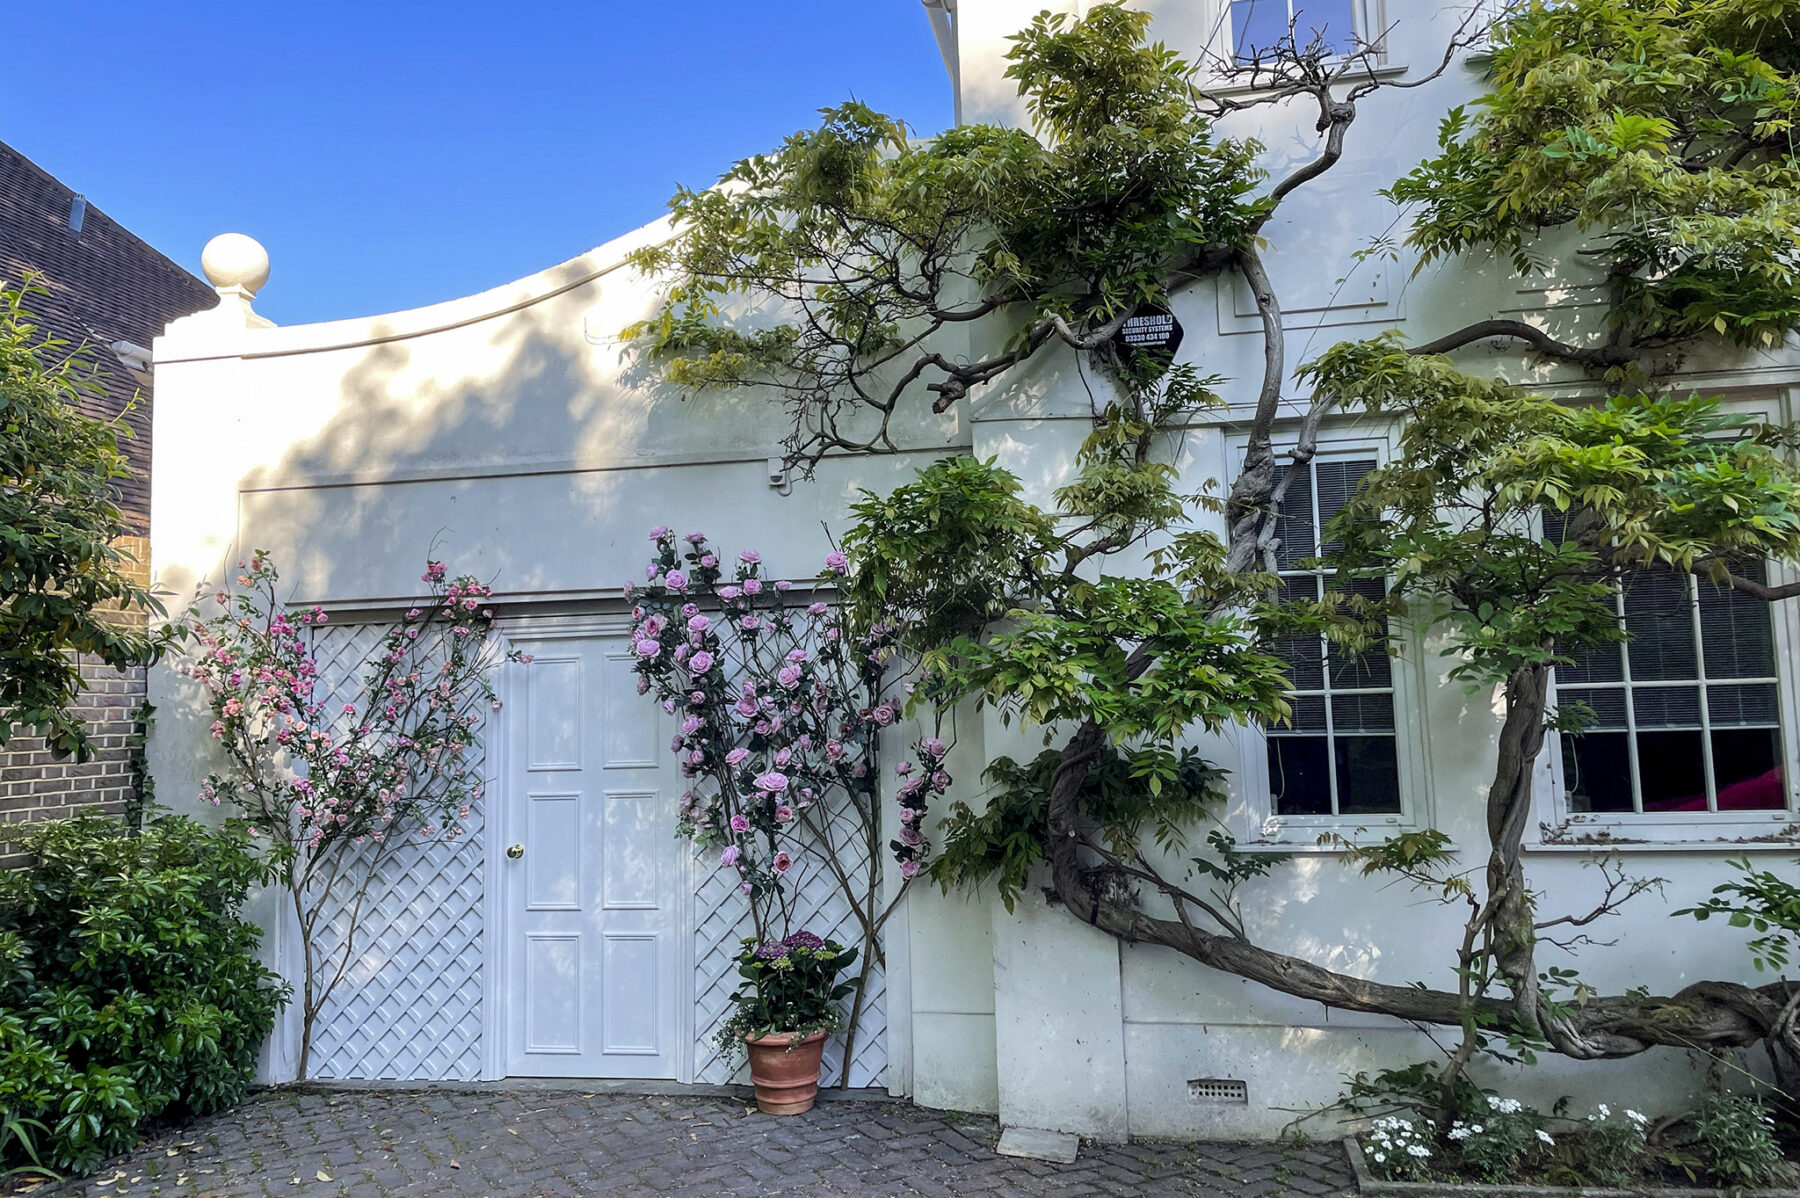 Double garage driveway wisteria roses filming location hire lodge London 8